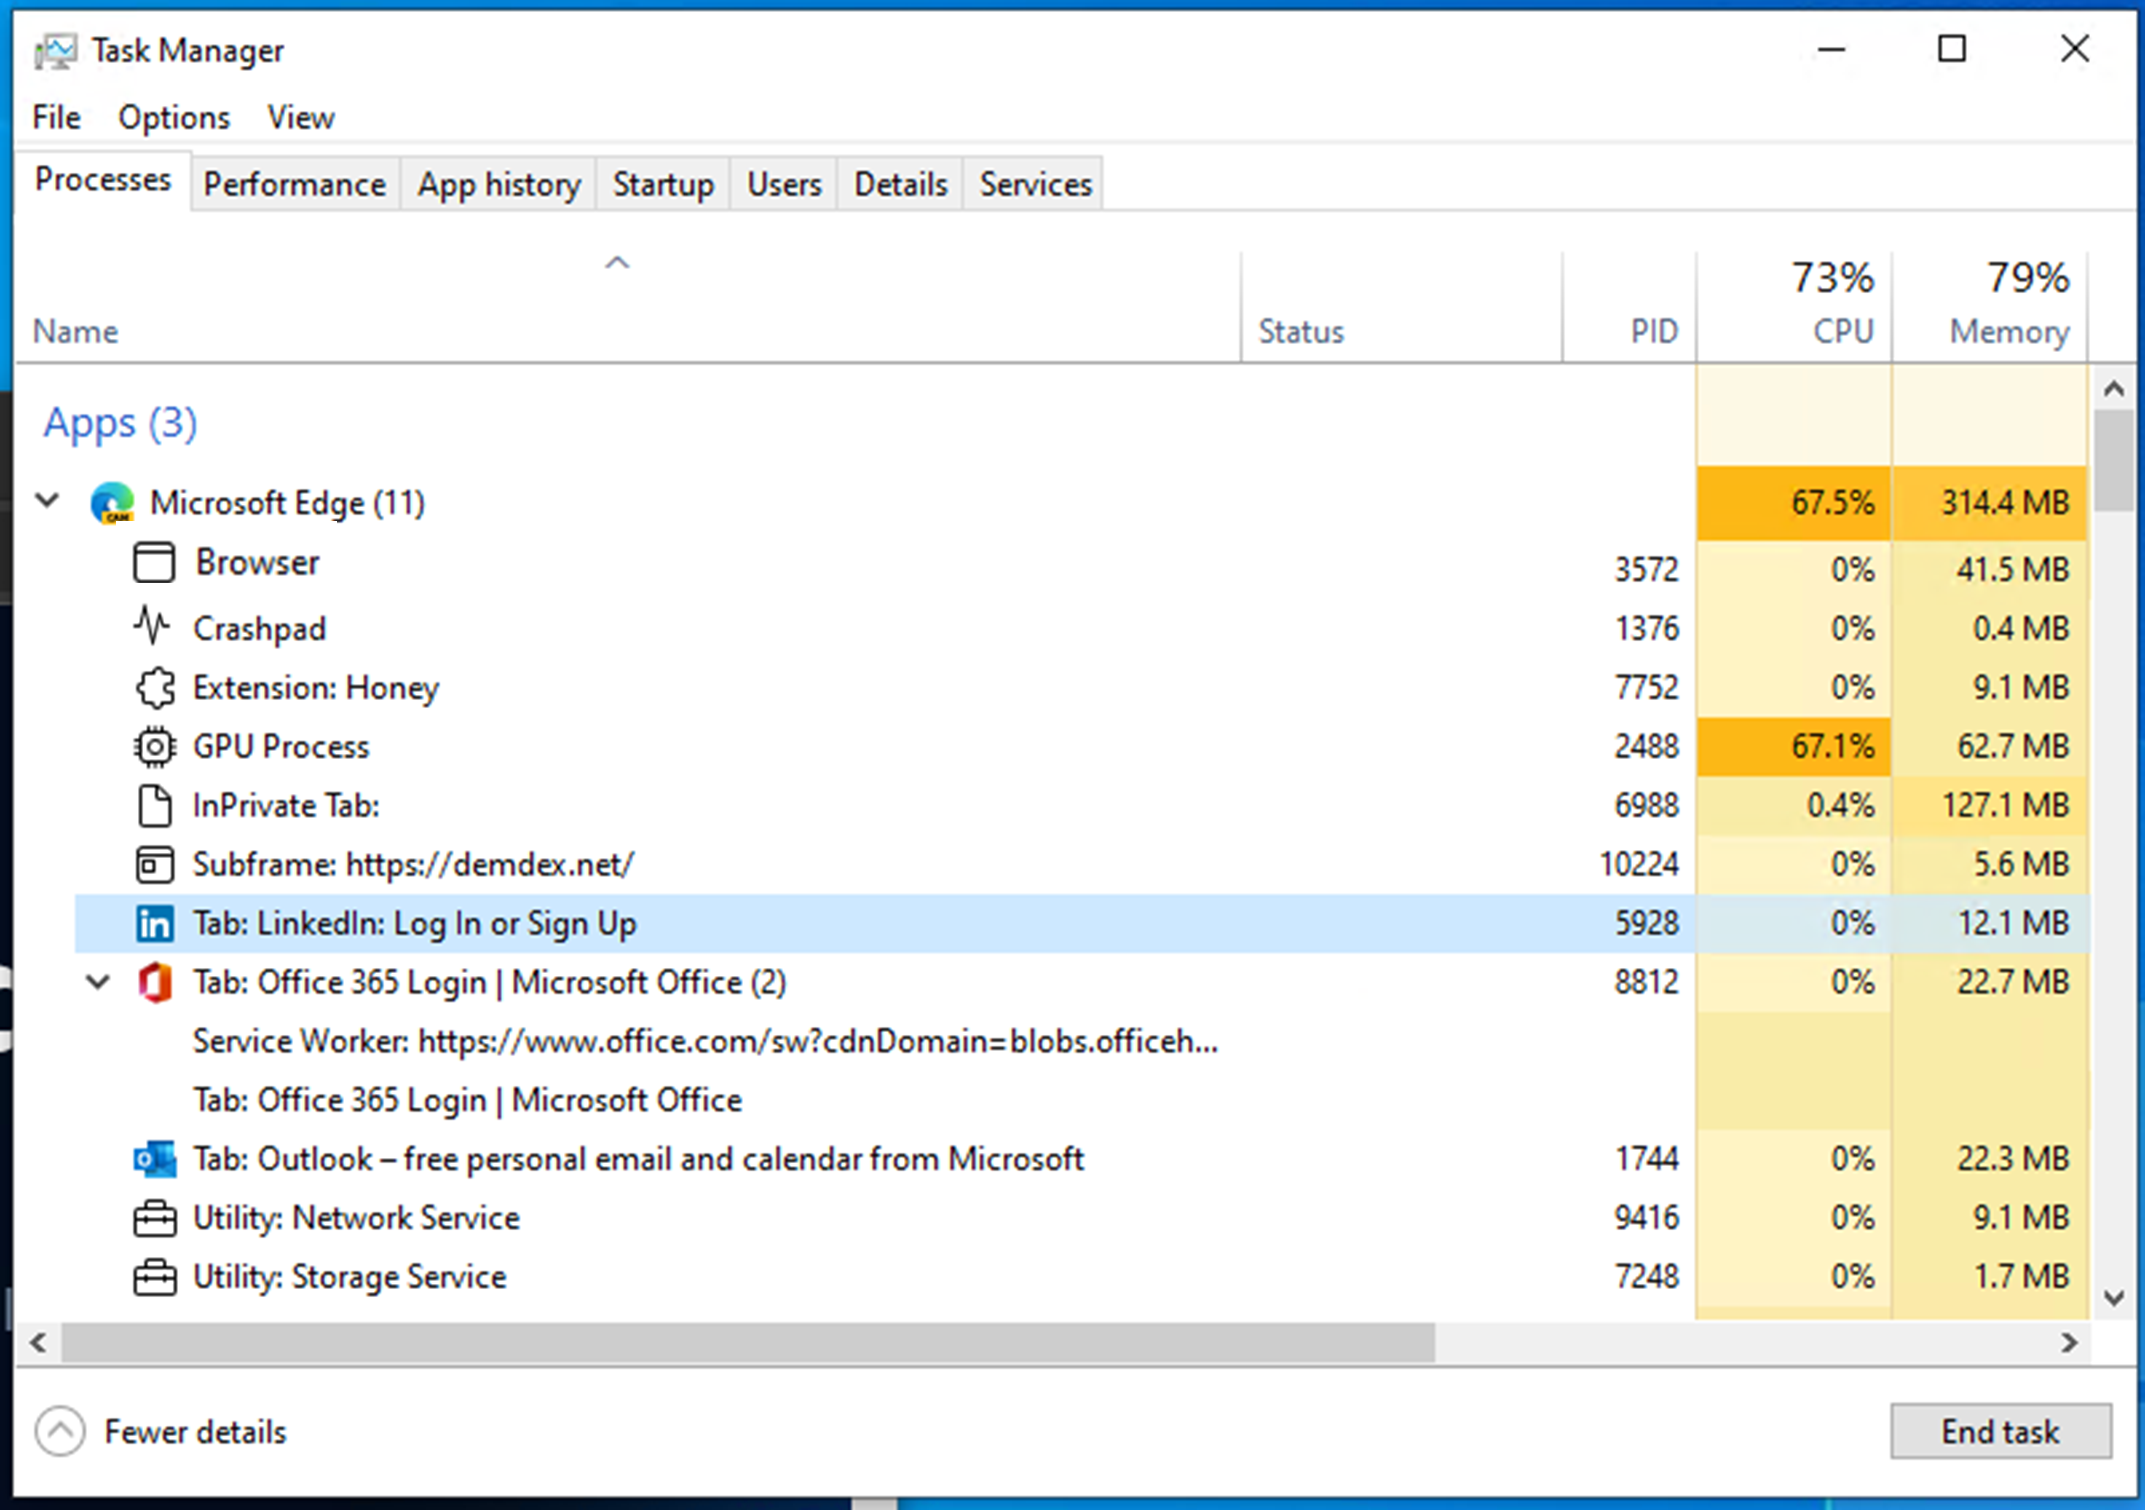 Task Manager showing Windows services and their PIDs